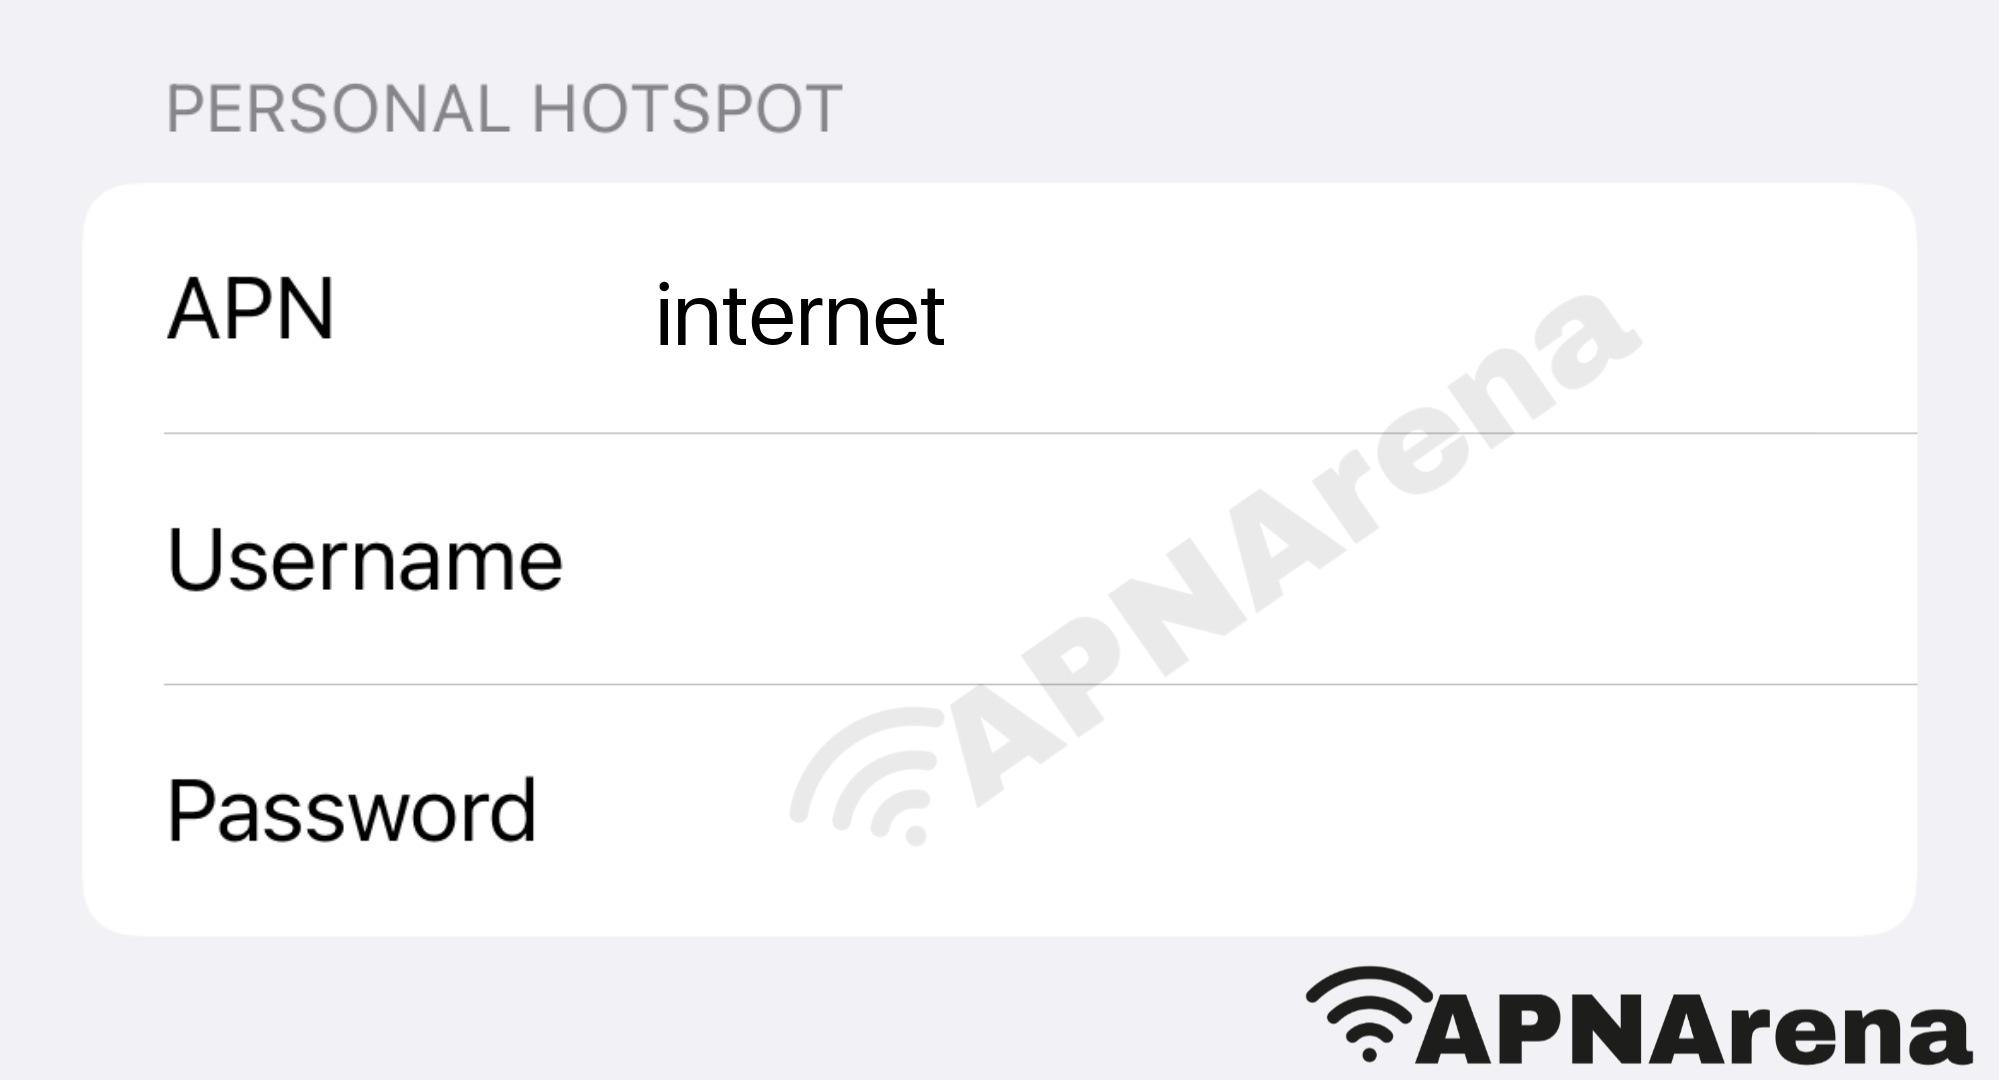 Ufone Personal Hotspot Settings for iPhone